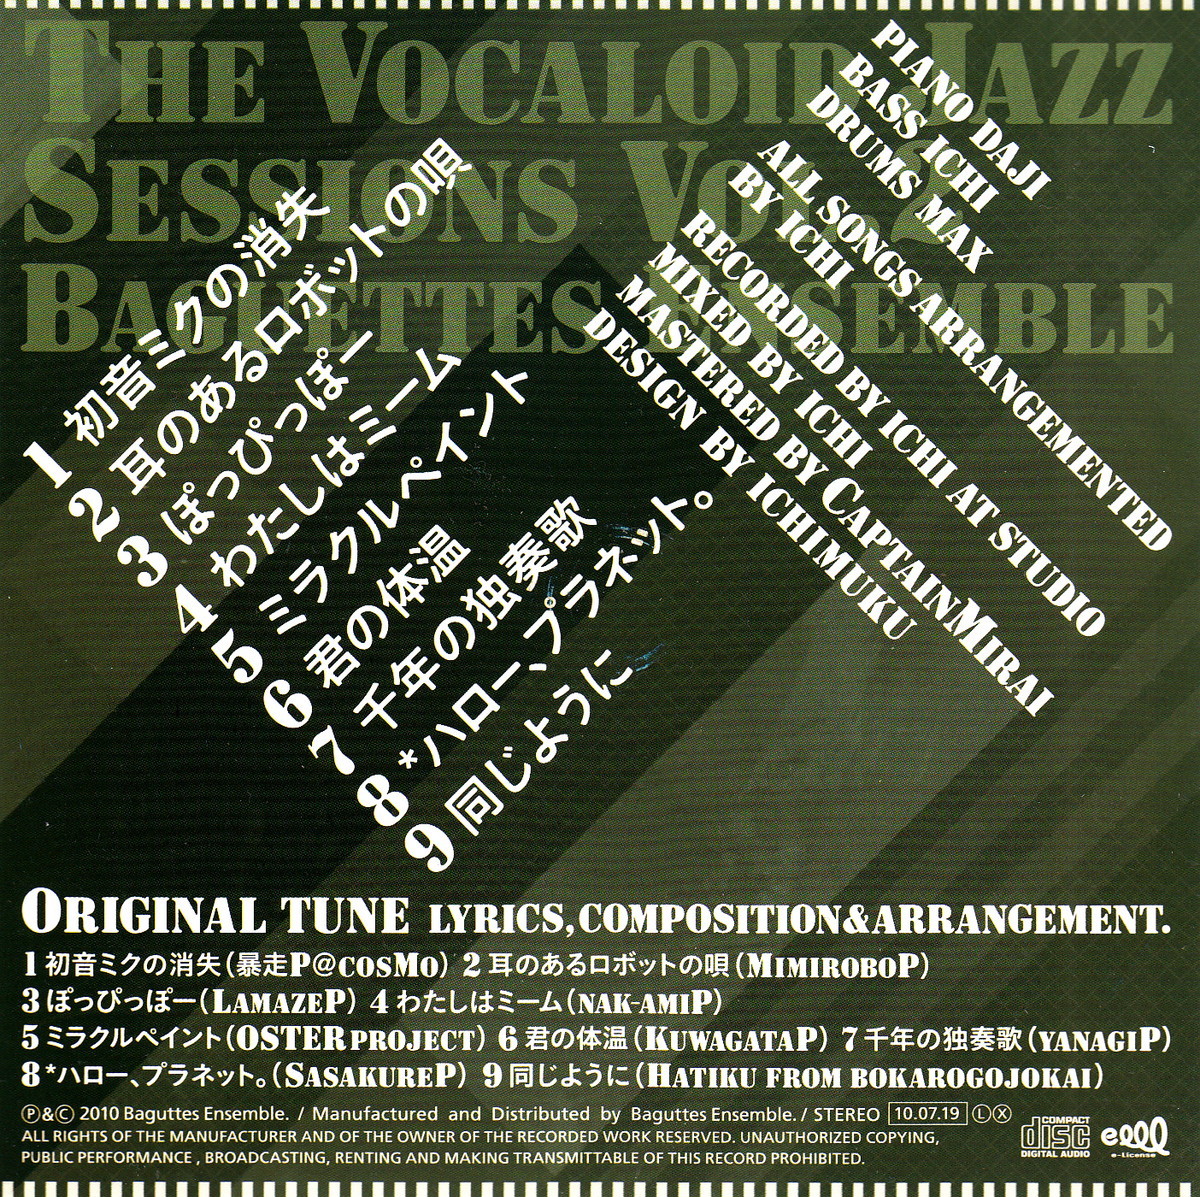 ★Baguettes Ensemble:The Vocaloid Jazz sessions Vol.2/千年の独奏歌,初音ミクの消失,ボカロ,ボーカロイド,Vocaloid,ジャズアレンジ,同人_画像2